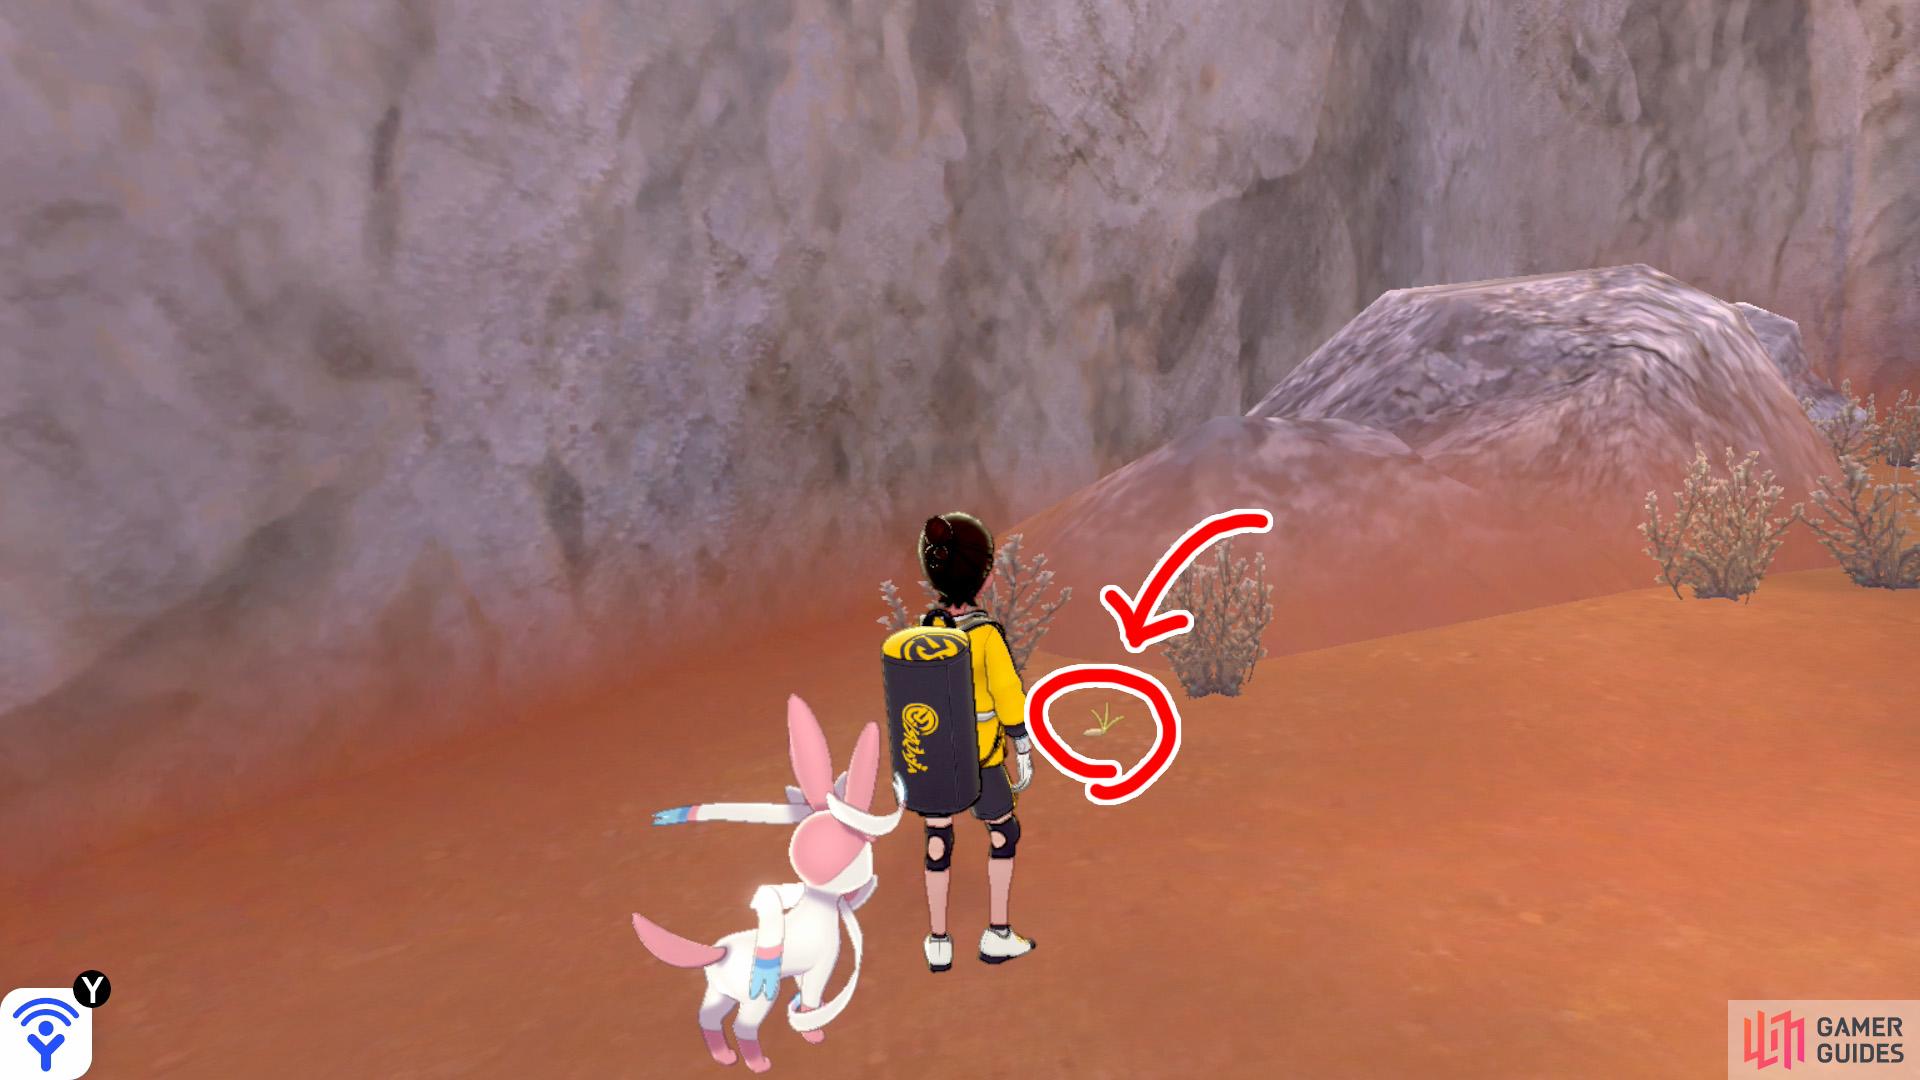 3/10: From Diglett 2, continue following the cliff wall in a clock-wise direction. Keep going until you reach a boulder in the corner of the zone. You'll go past two tall trees. Search near the vegetation below the boulder.